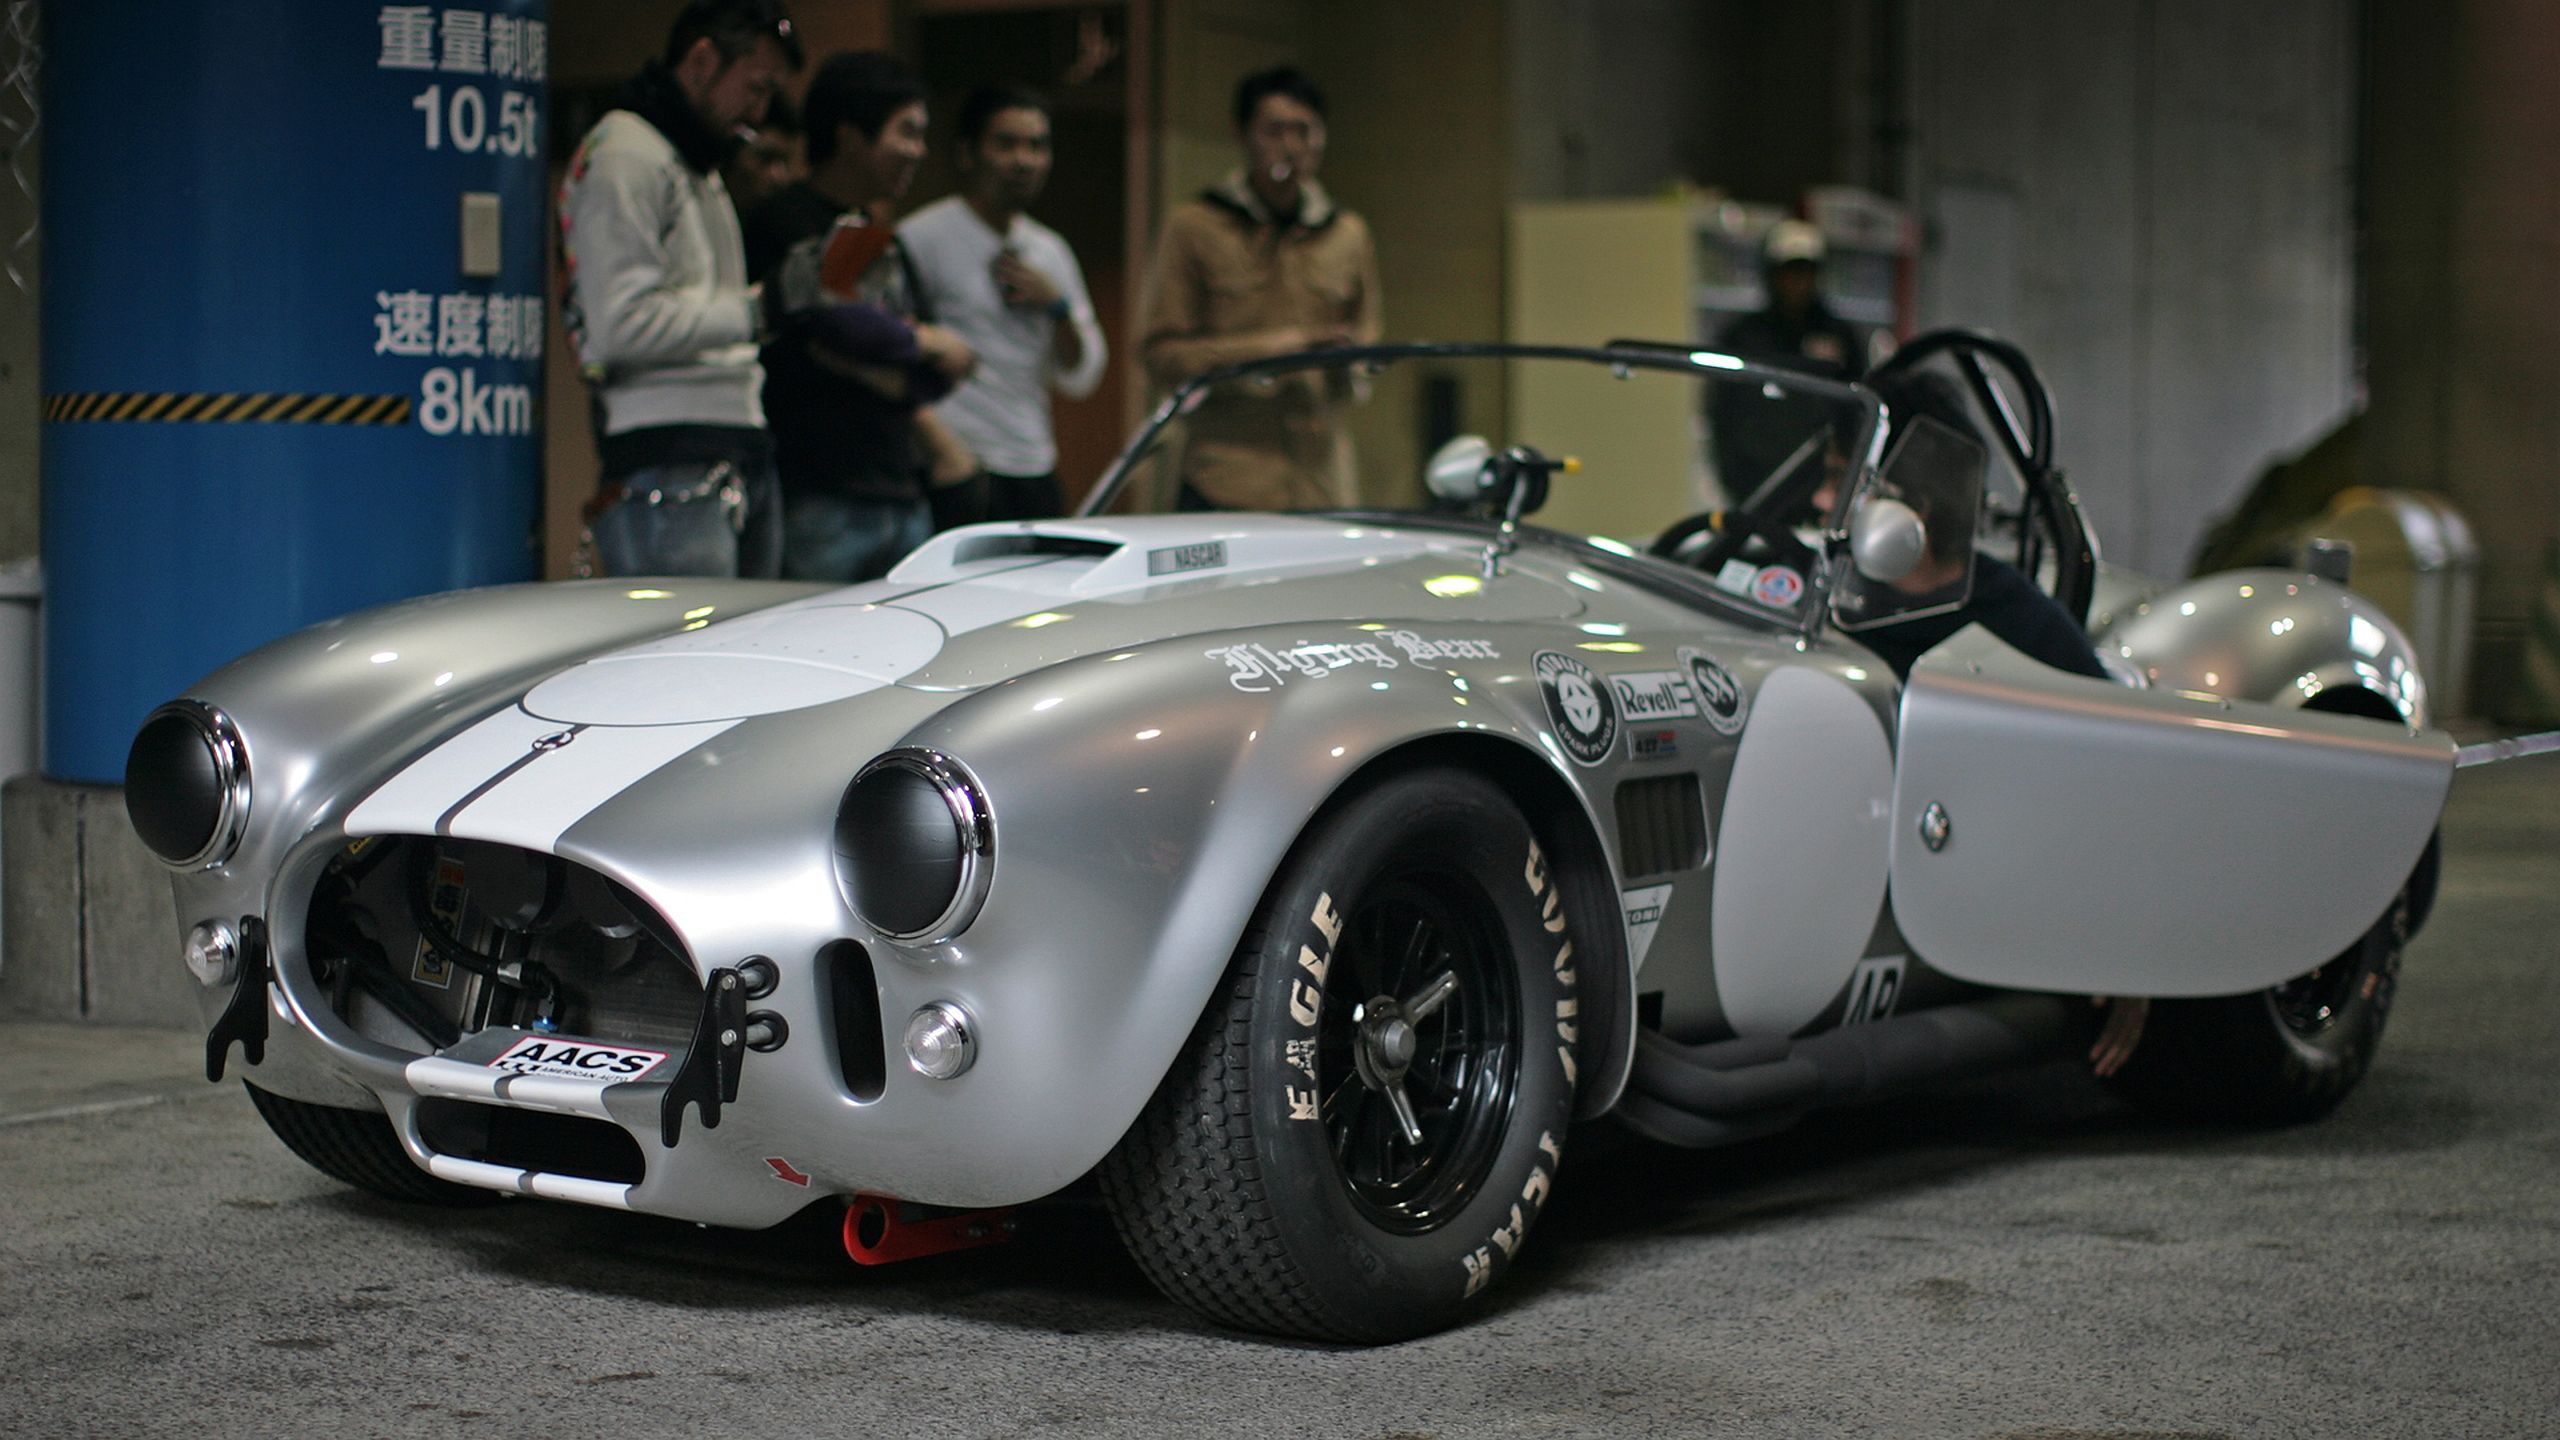 AC Cobra HD Wallpaper and Background Image